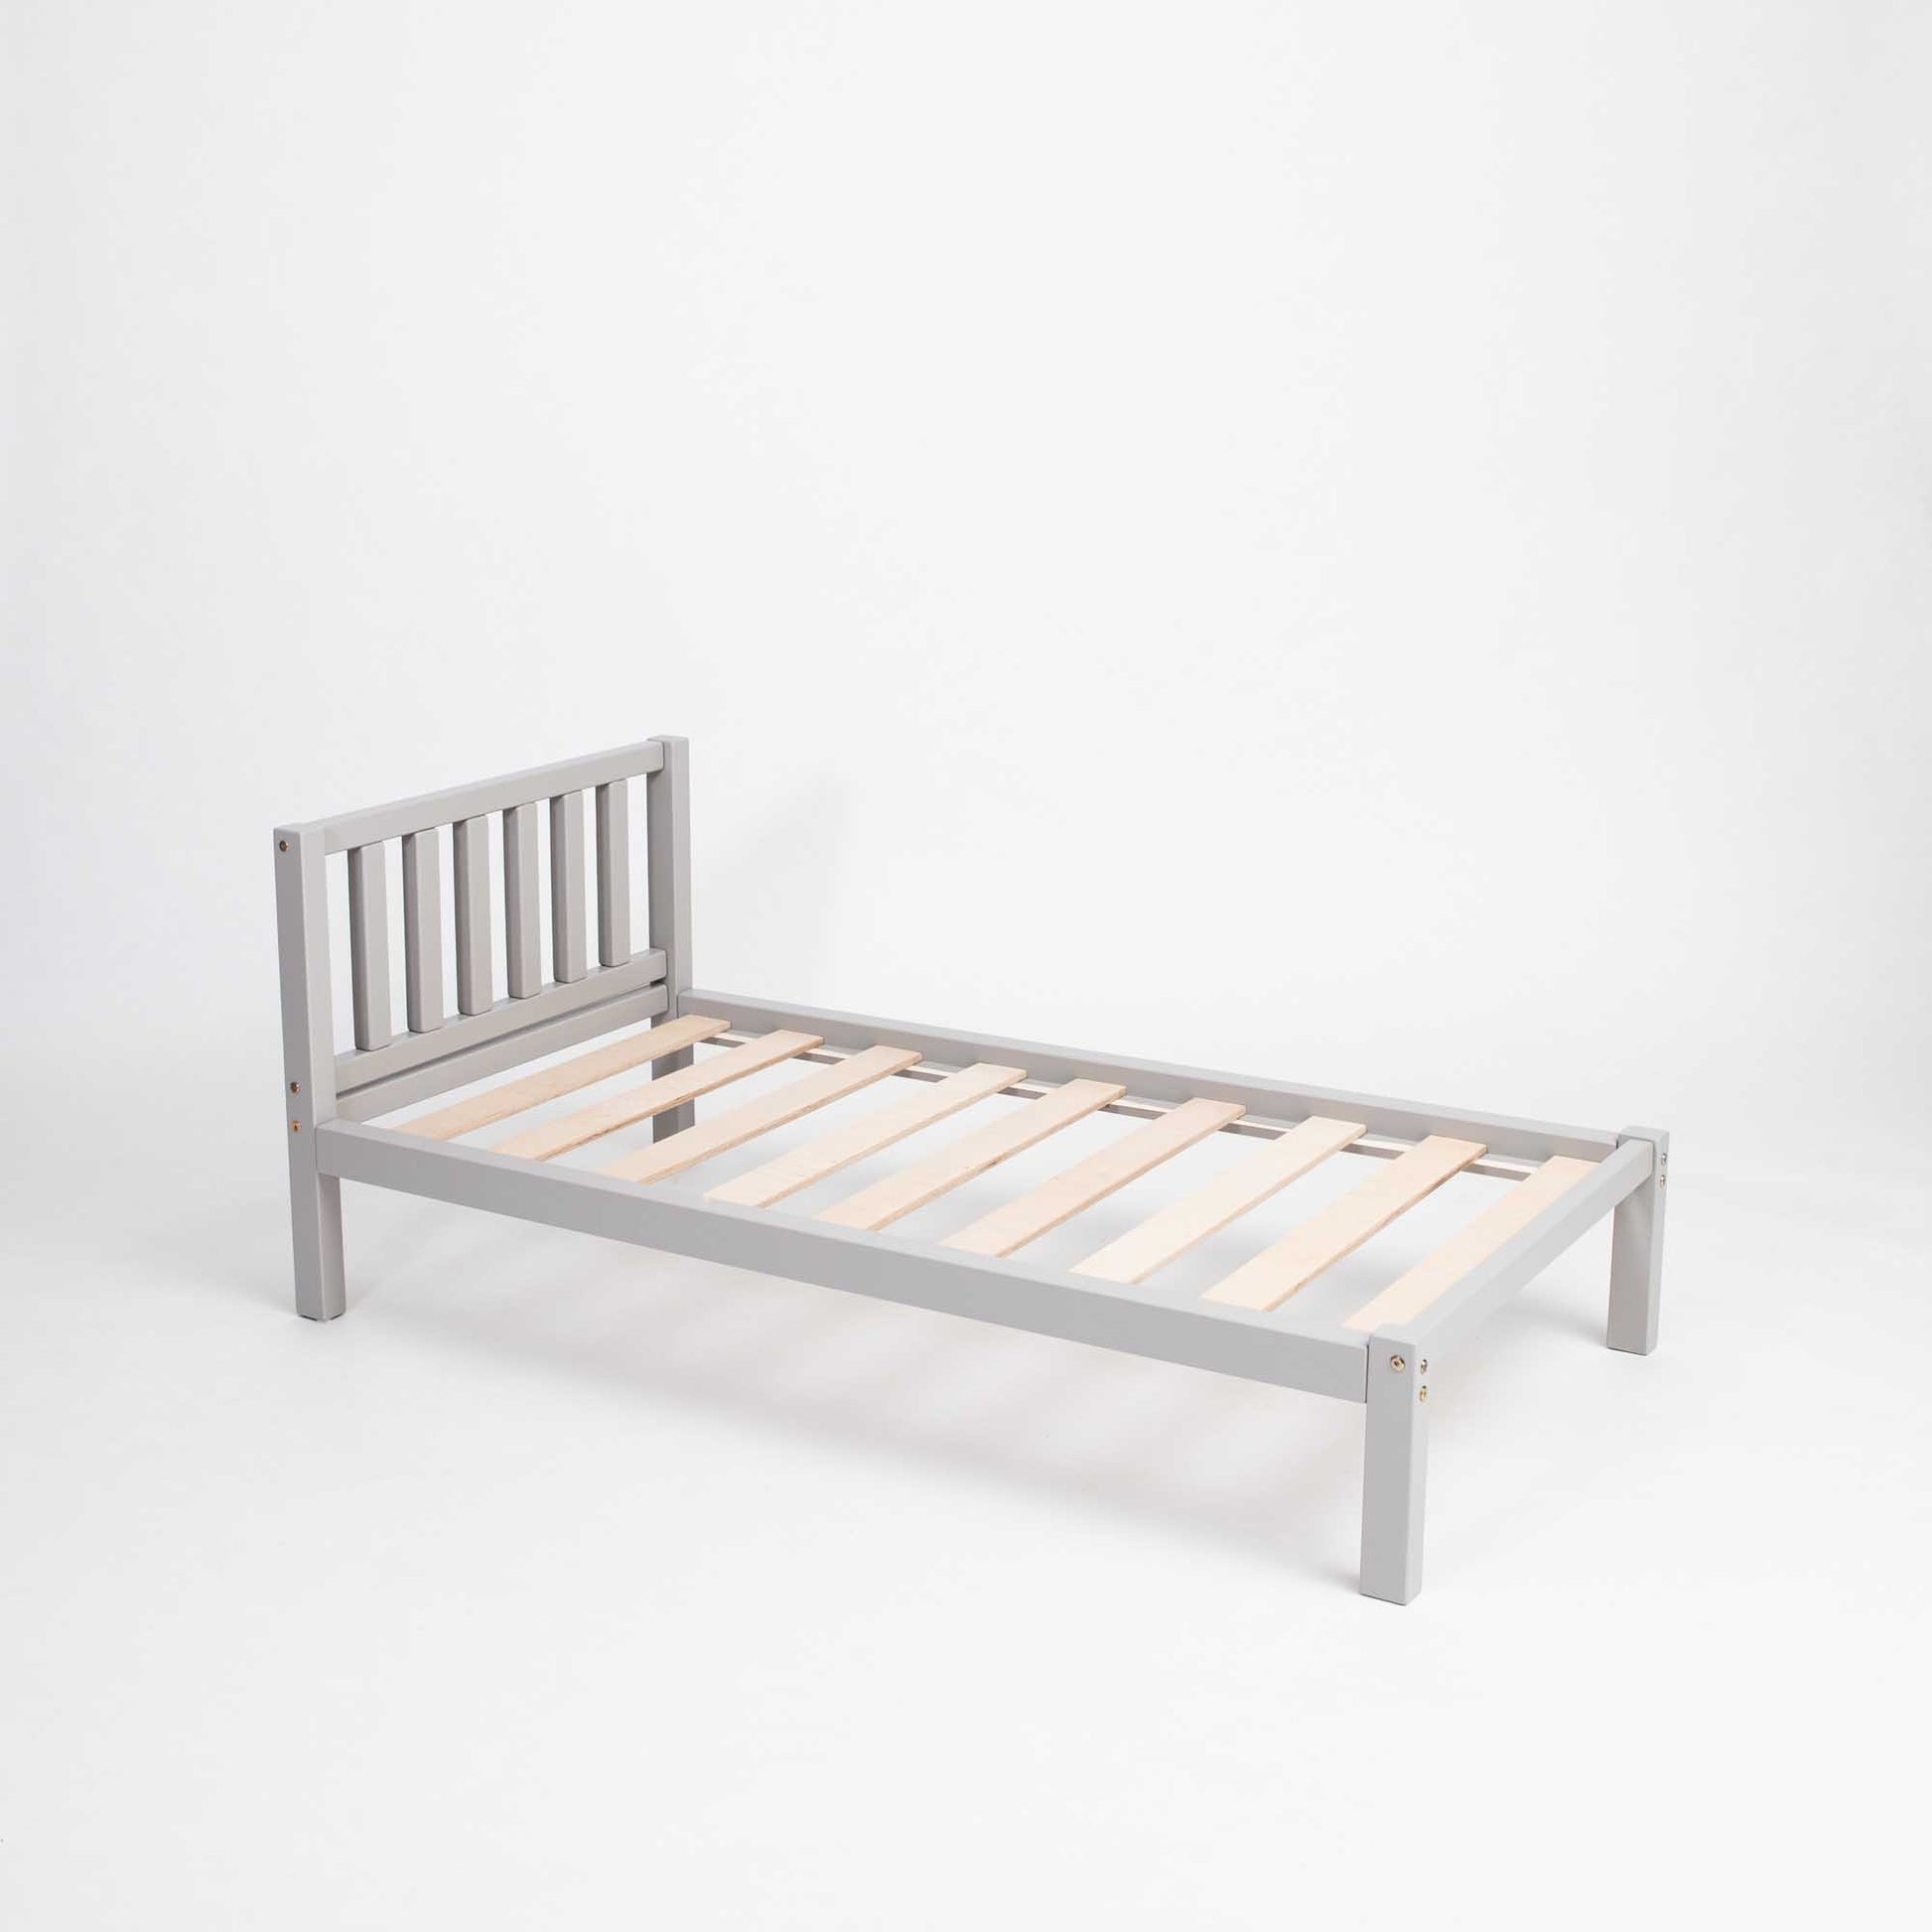 A Sweet Home From Wood Kids' bed on legs with a headboard, perfect for children who seek independence and follow Montessori principles.